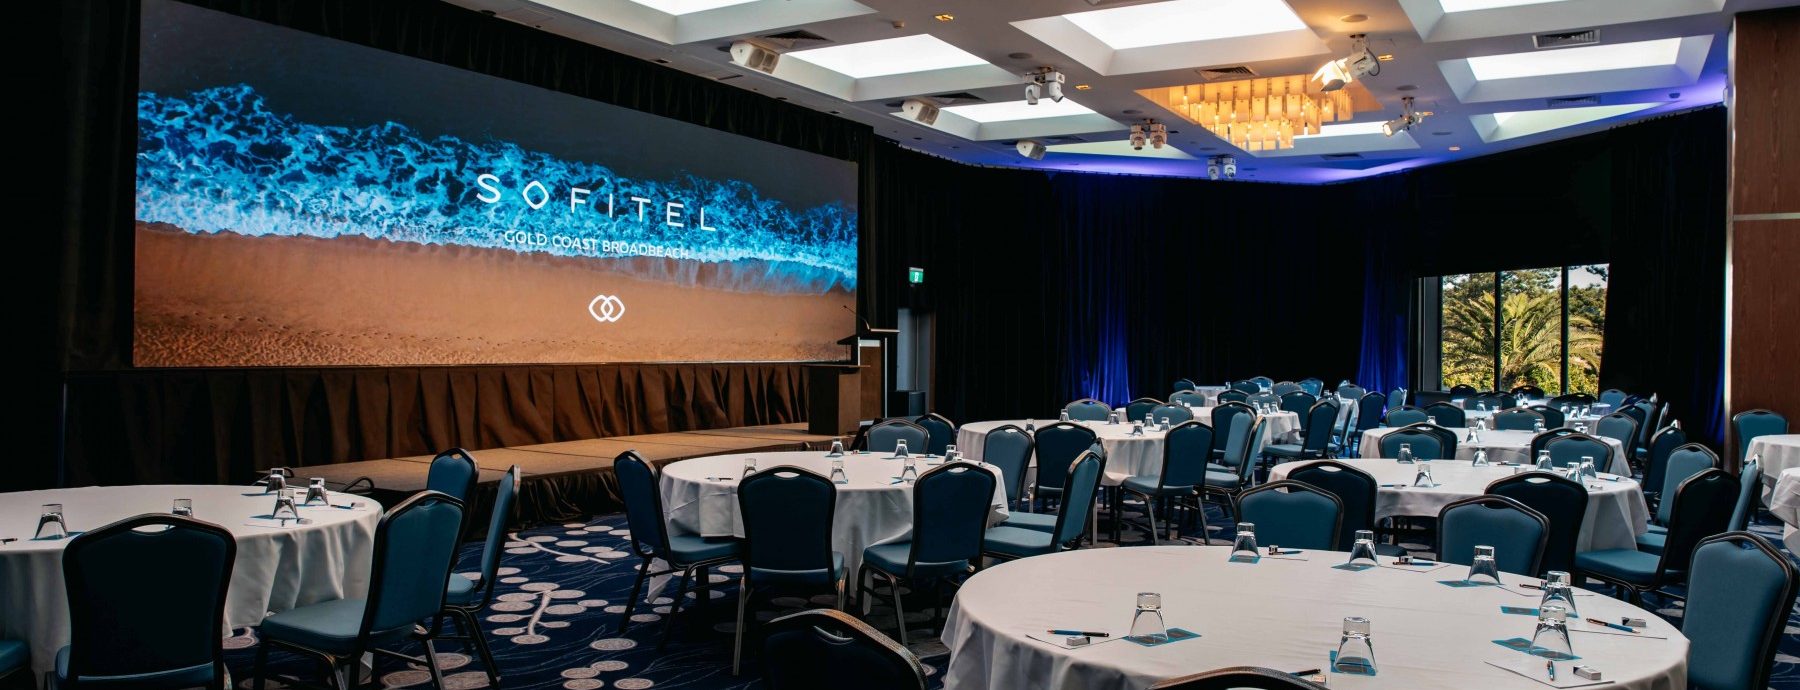 sofitel-gold-coast-broadbeach-your-ideal-destination-for-meetings-and-events